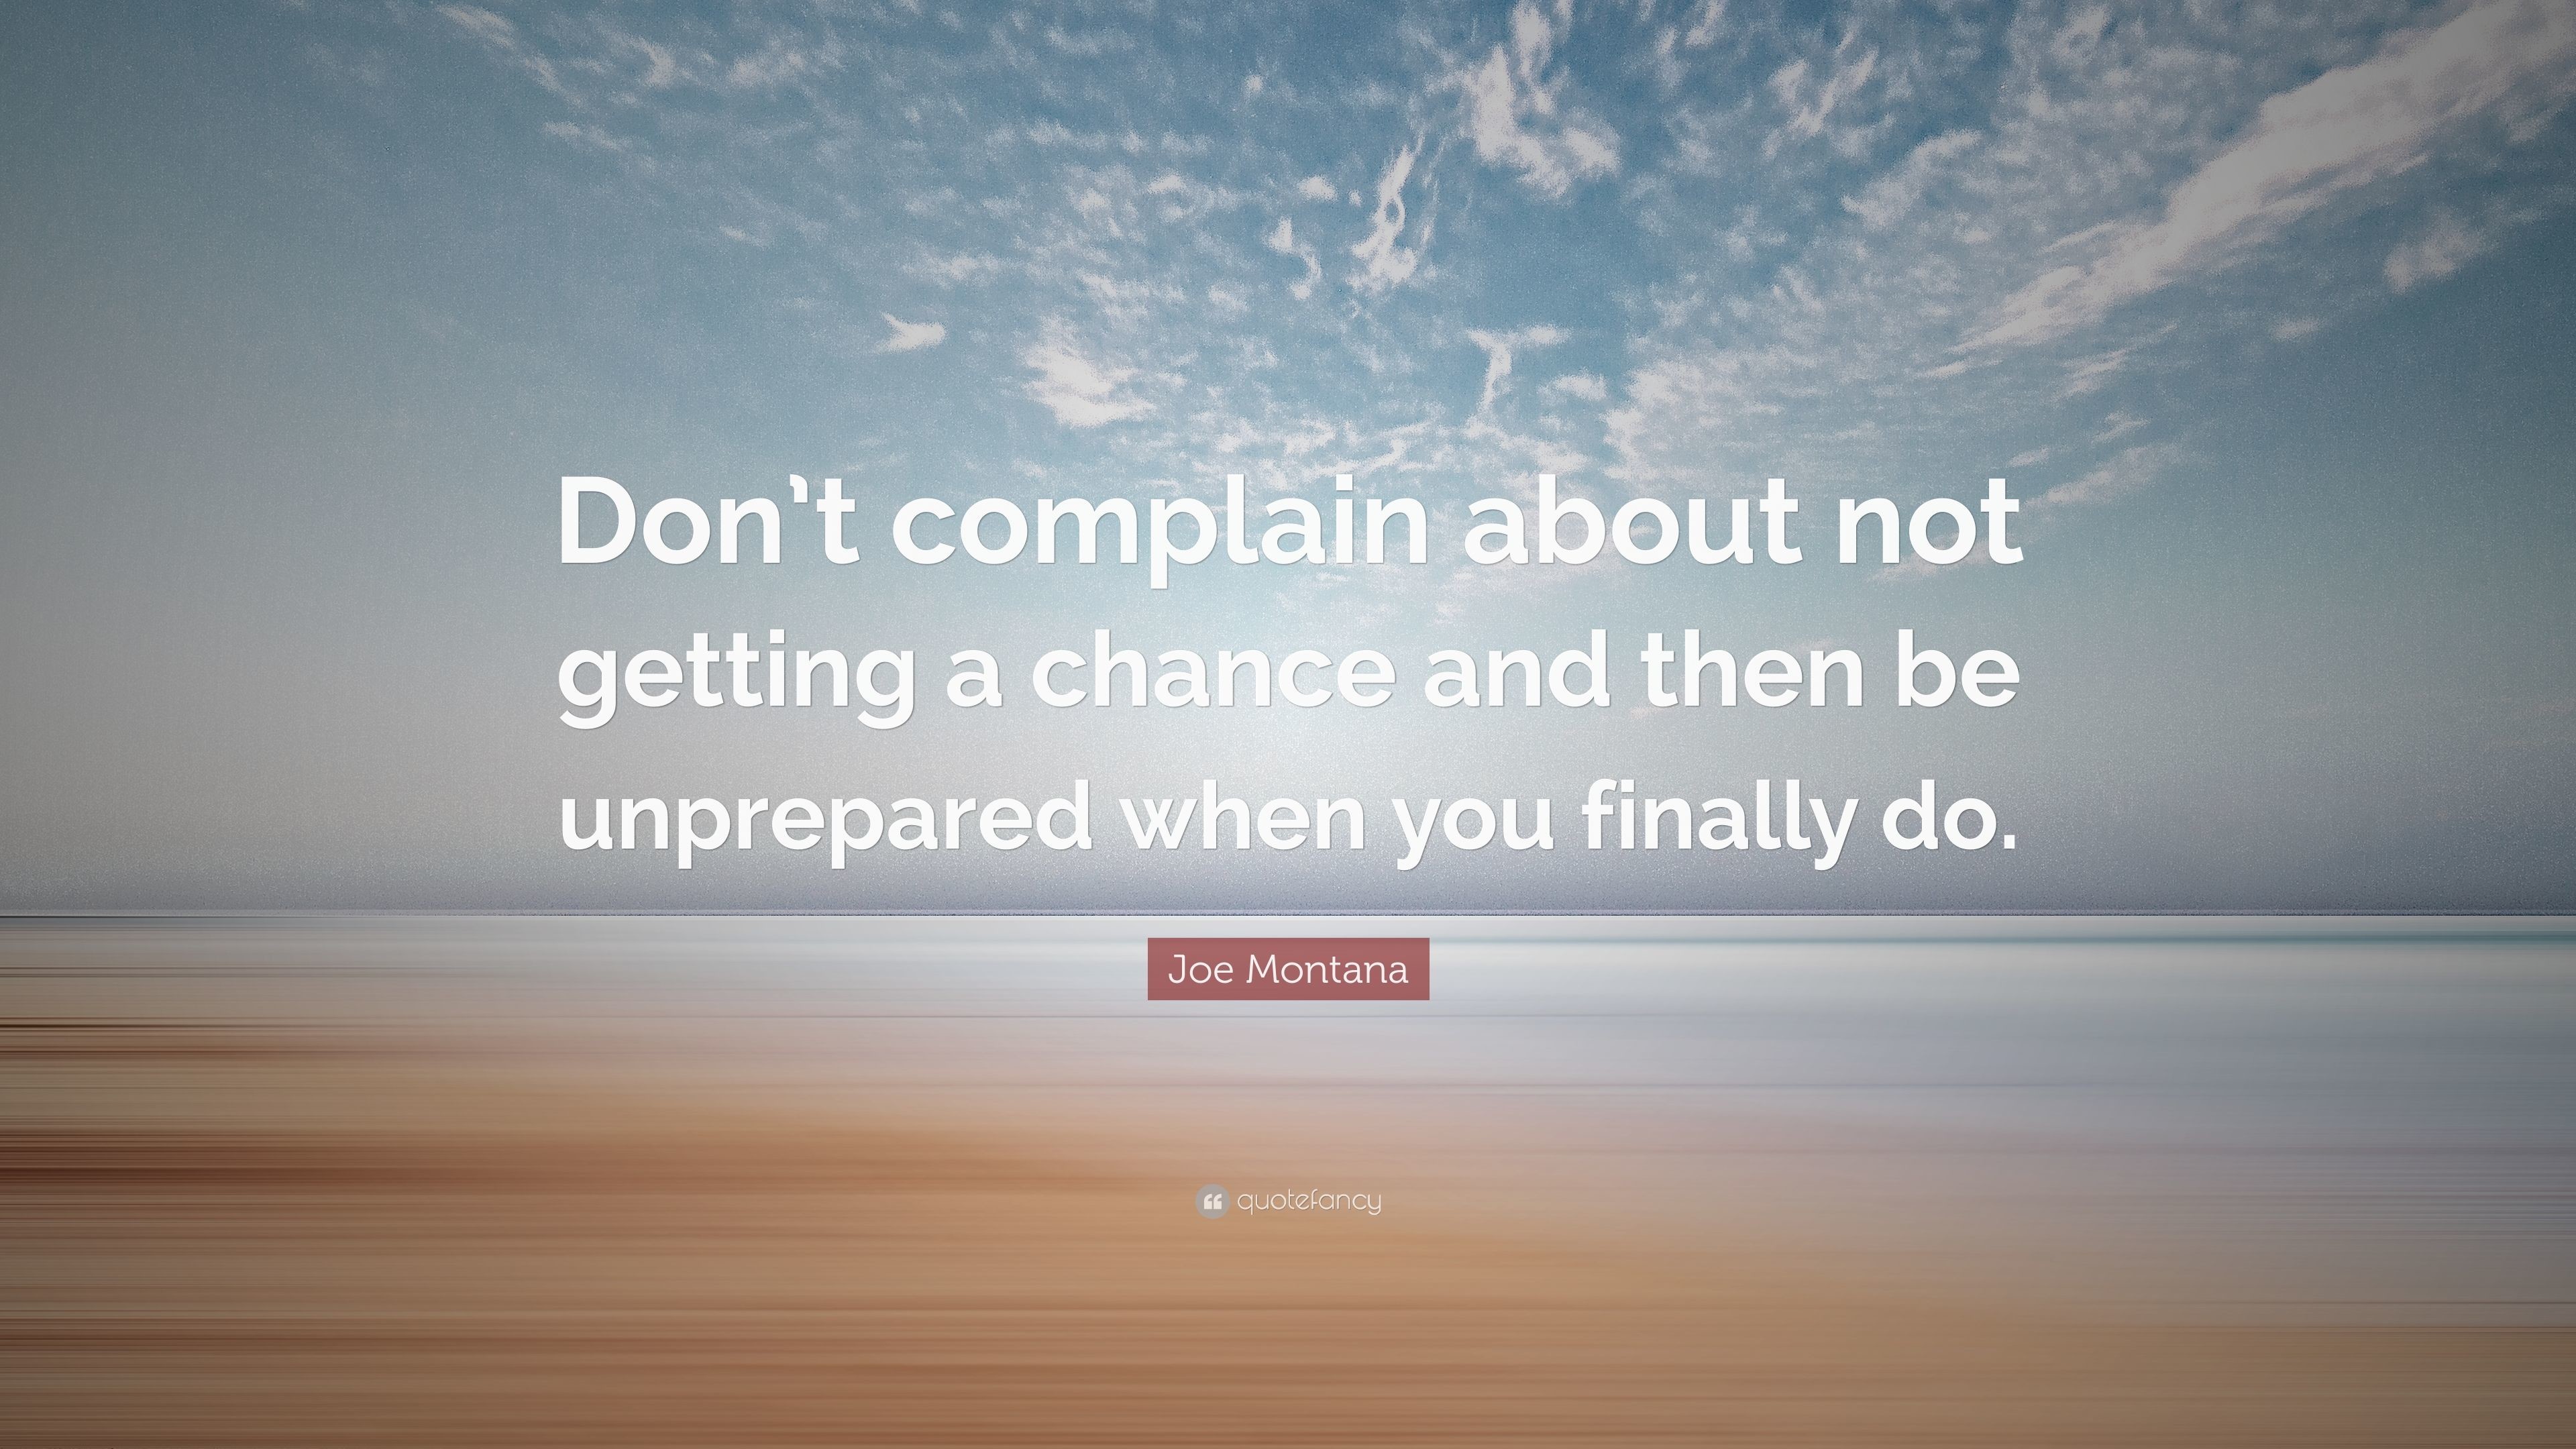 3840x2160 Joe Montana Quote: “Don't complain about not getting a chance and then